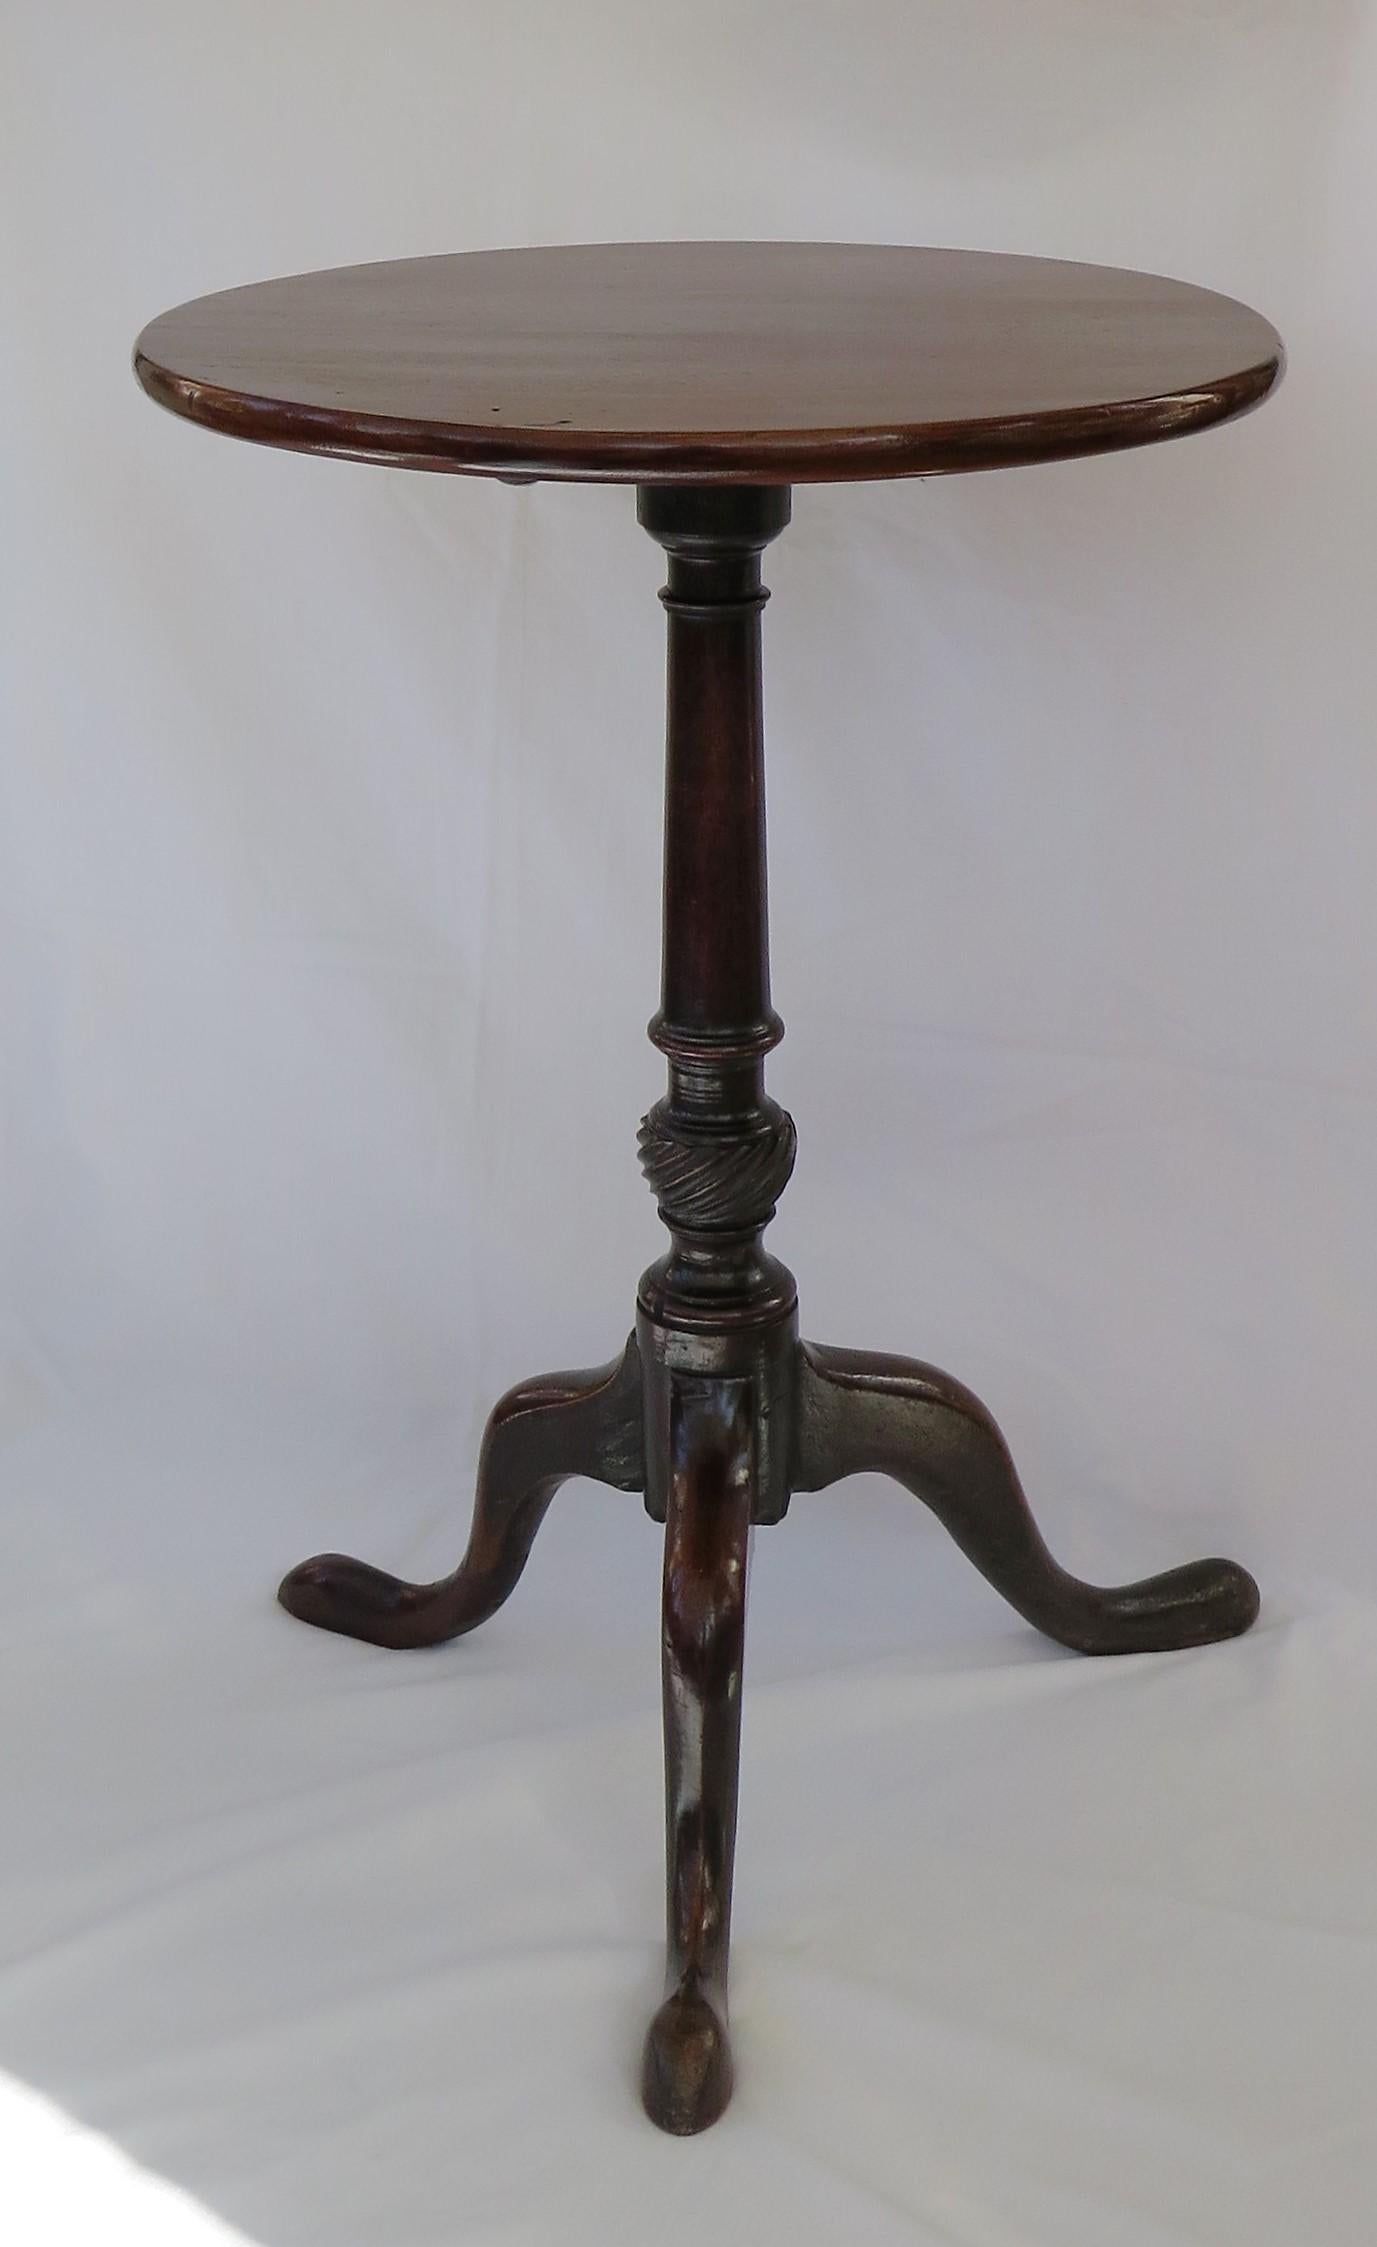 This is an elegant and beautifully proportioned solid hardwood, possibly walnut, tripod table or wine table with a tilting top and dates to the Mid Georgian Chippendale period, circa 1760.

The circular top is made from one-piece of solid hardwood,